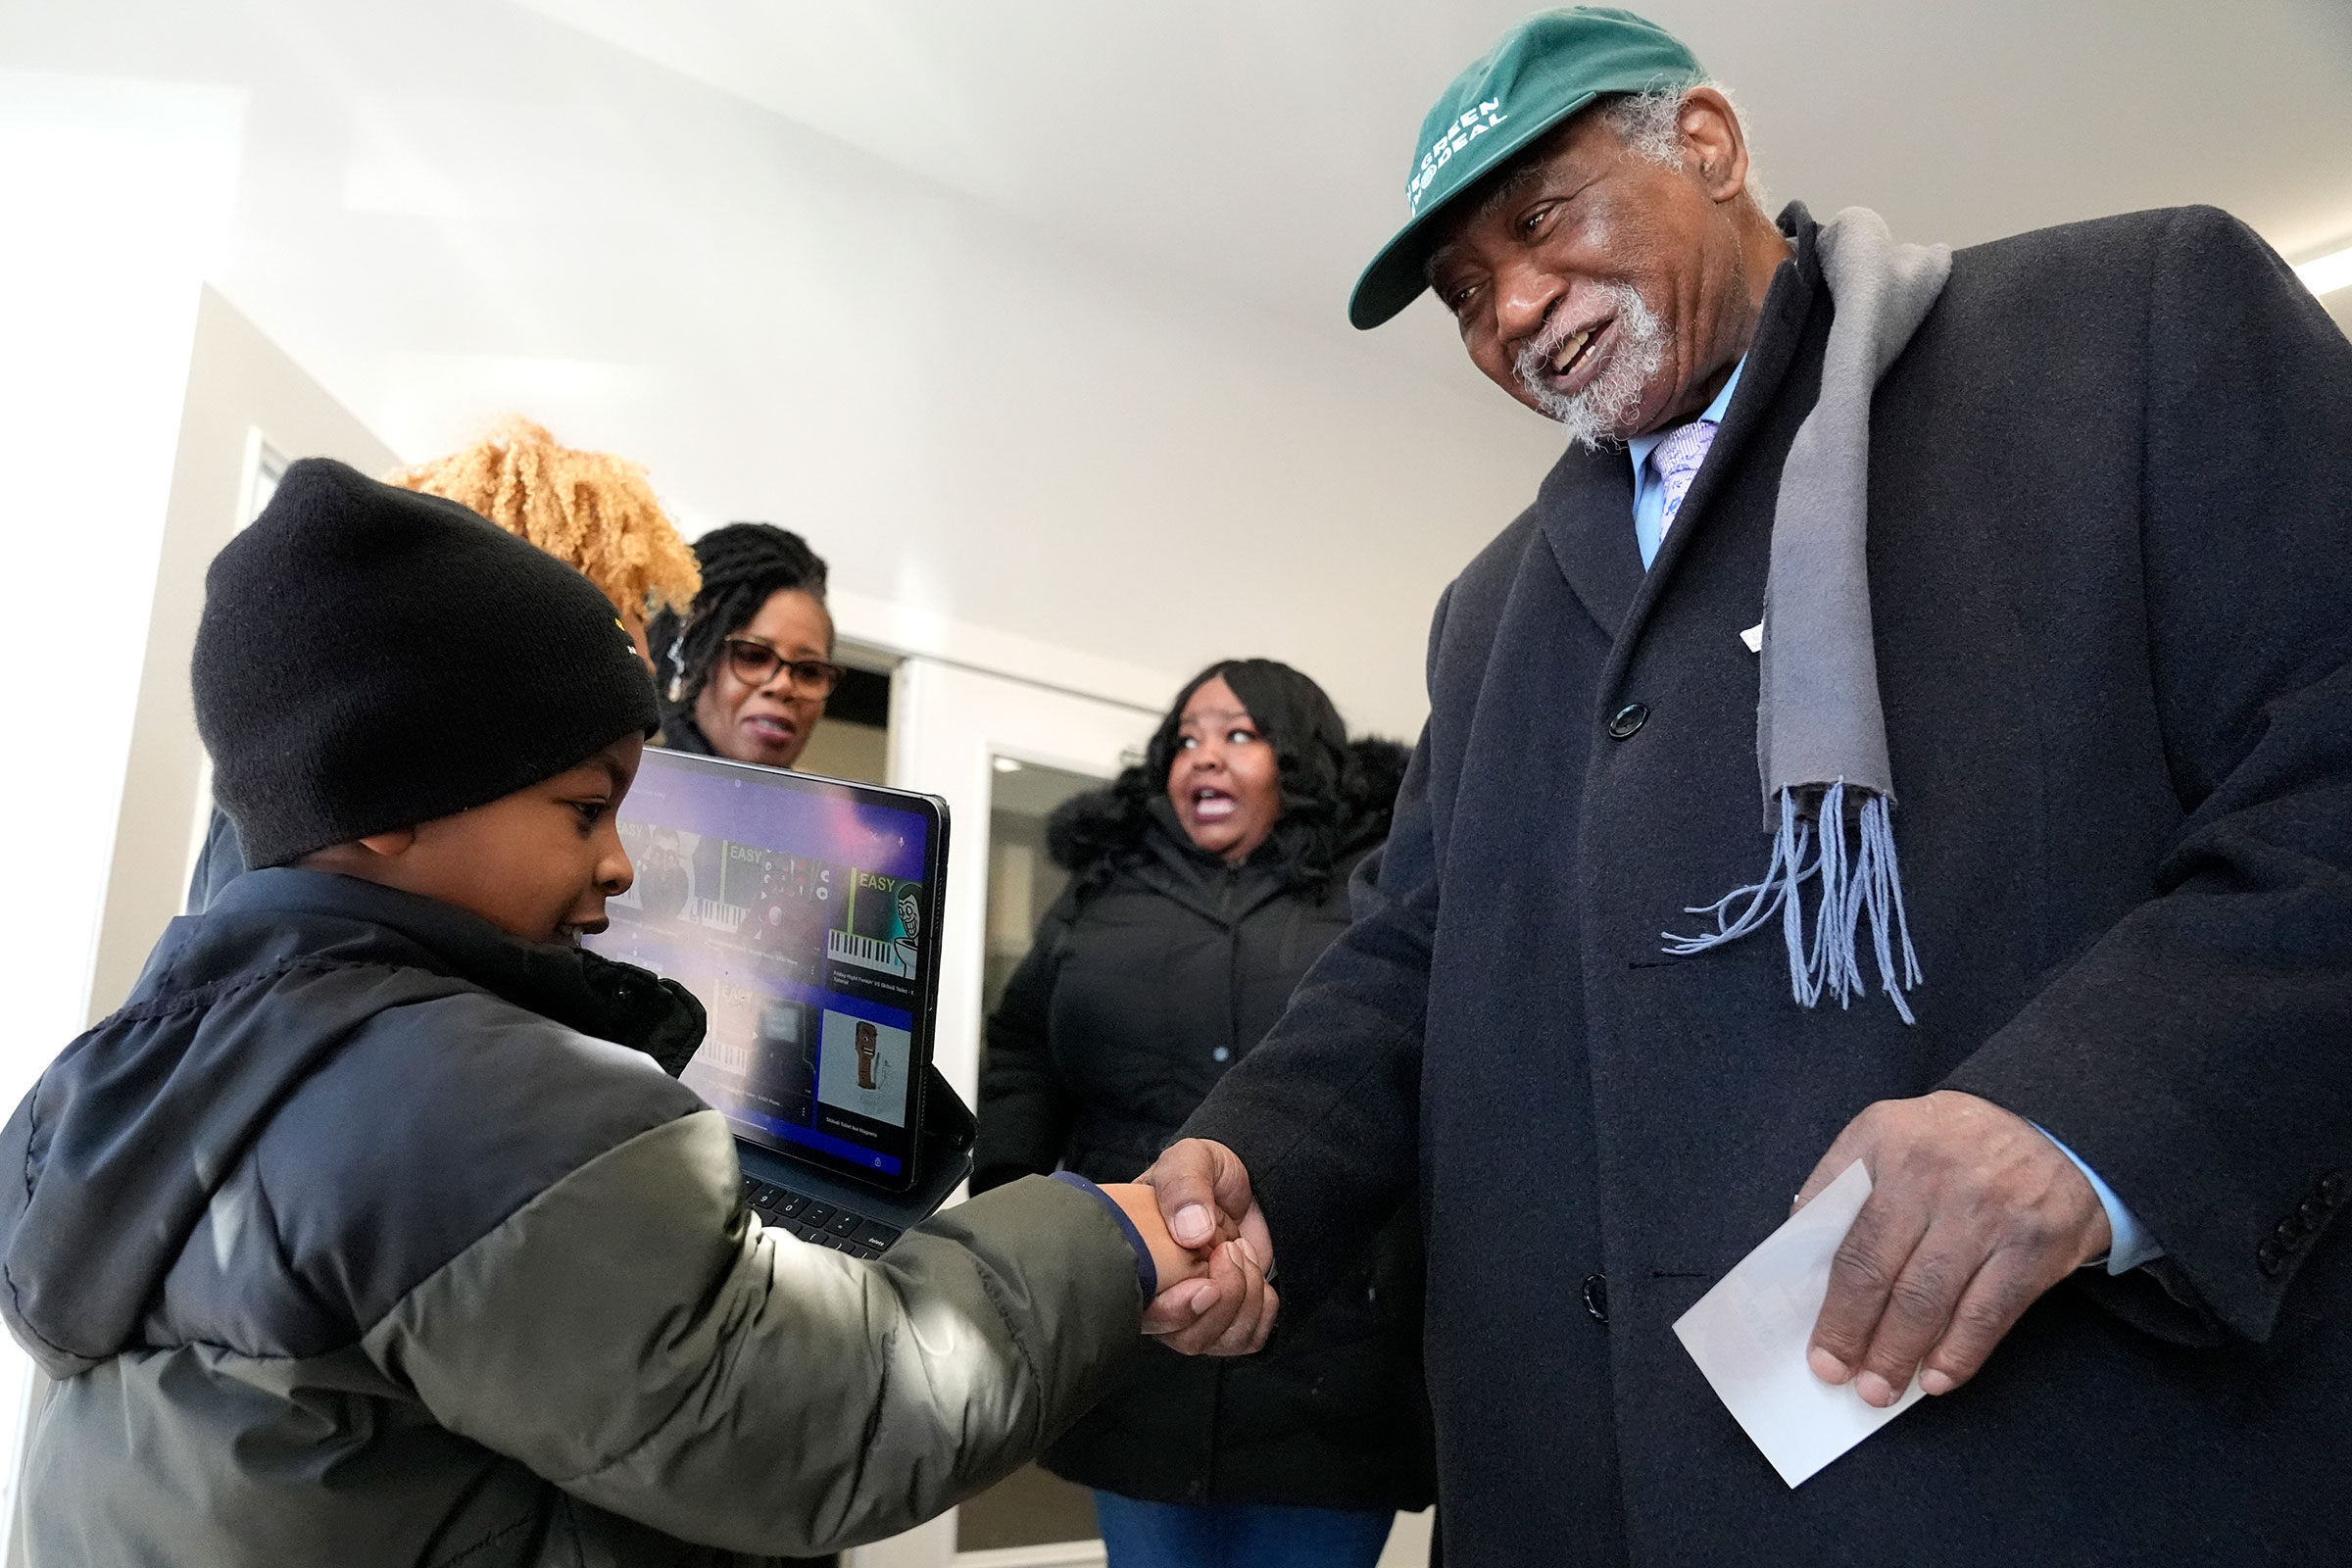 Illinois Rep. Danny Davis greets Miles Durosinmi, 7, after voting at Sankofa Cultural Arts & Business center in Chicago, Tuesday, March 19.